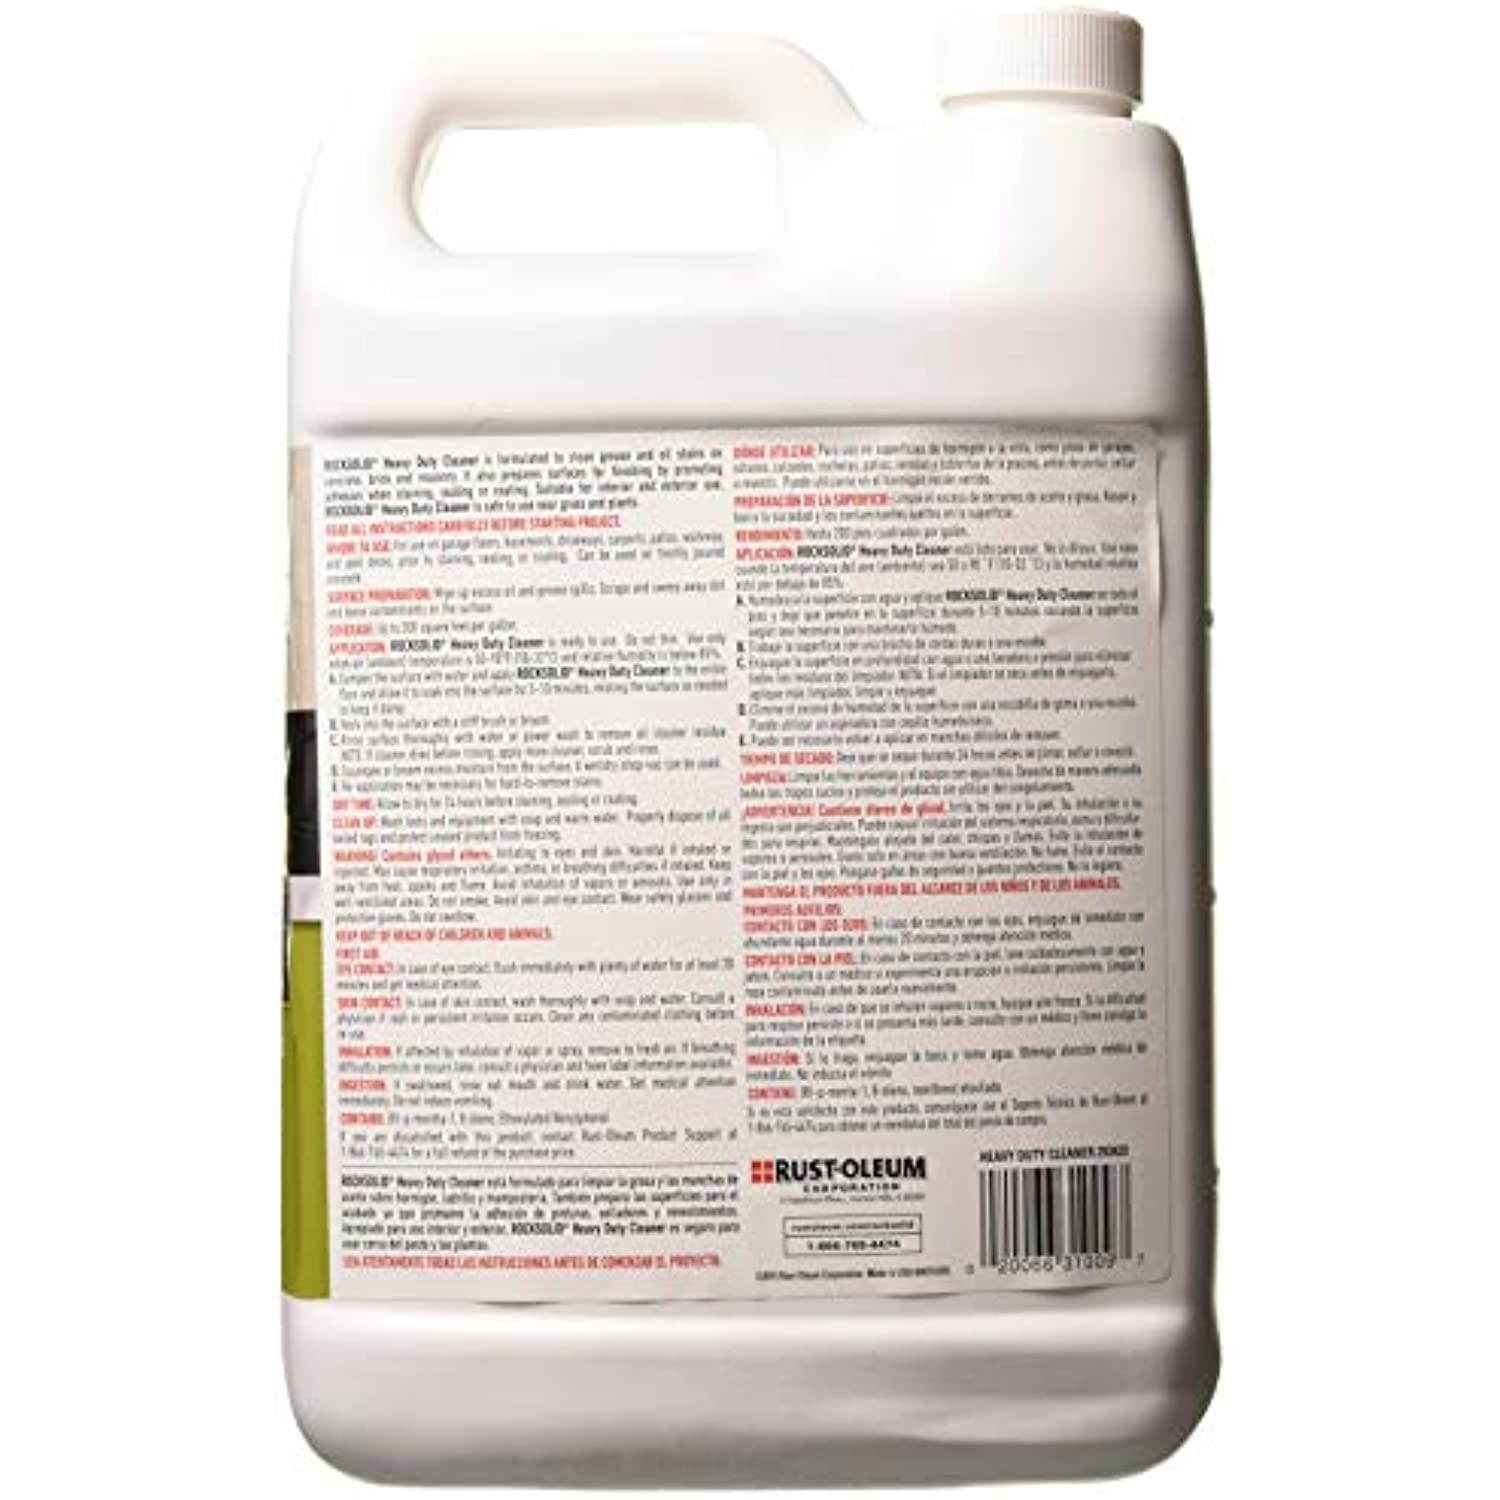 Rust-Oleum 293422 Rocksolid Heavy Duty Cleaner gal - image 2 of 4